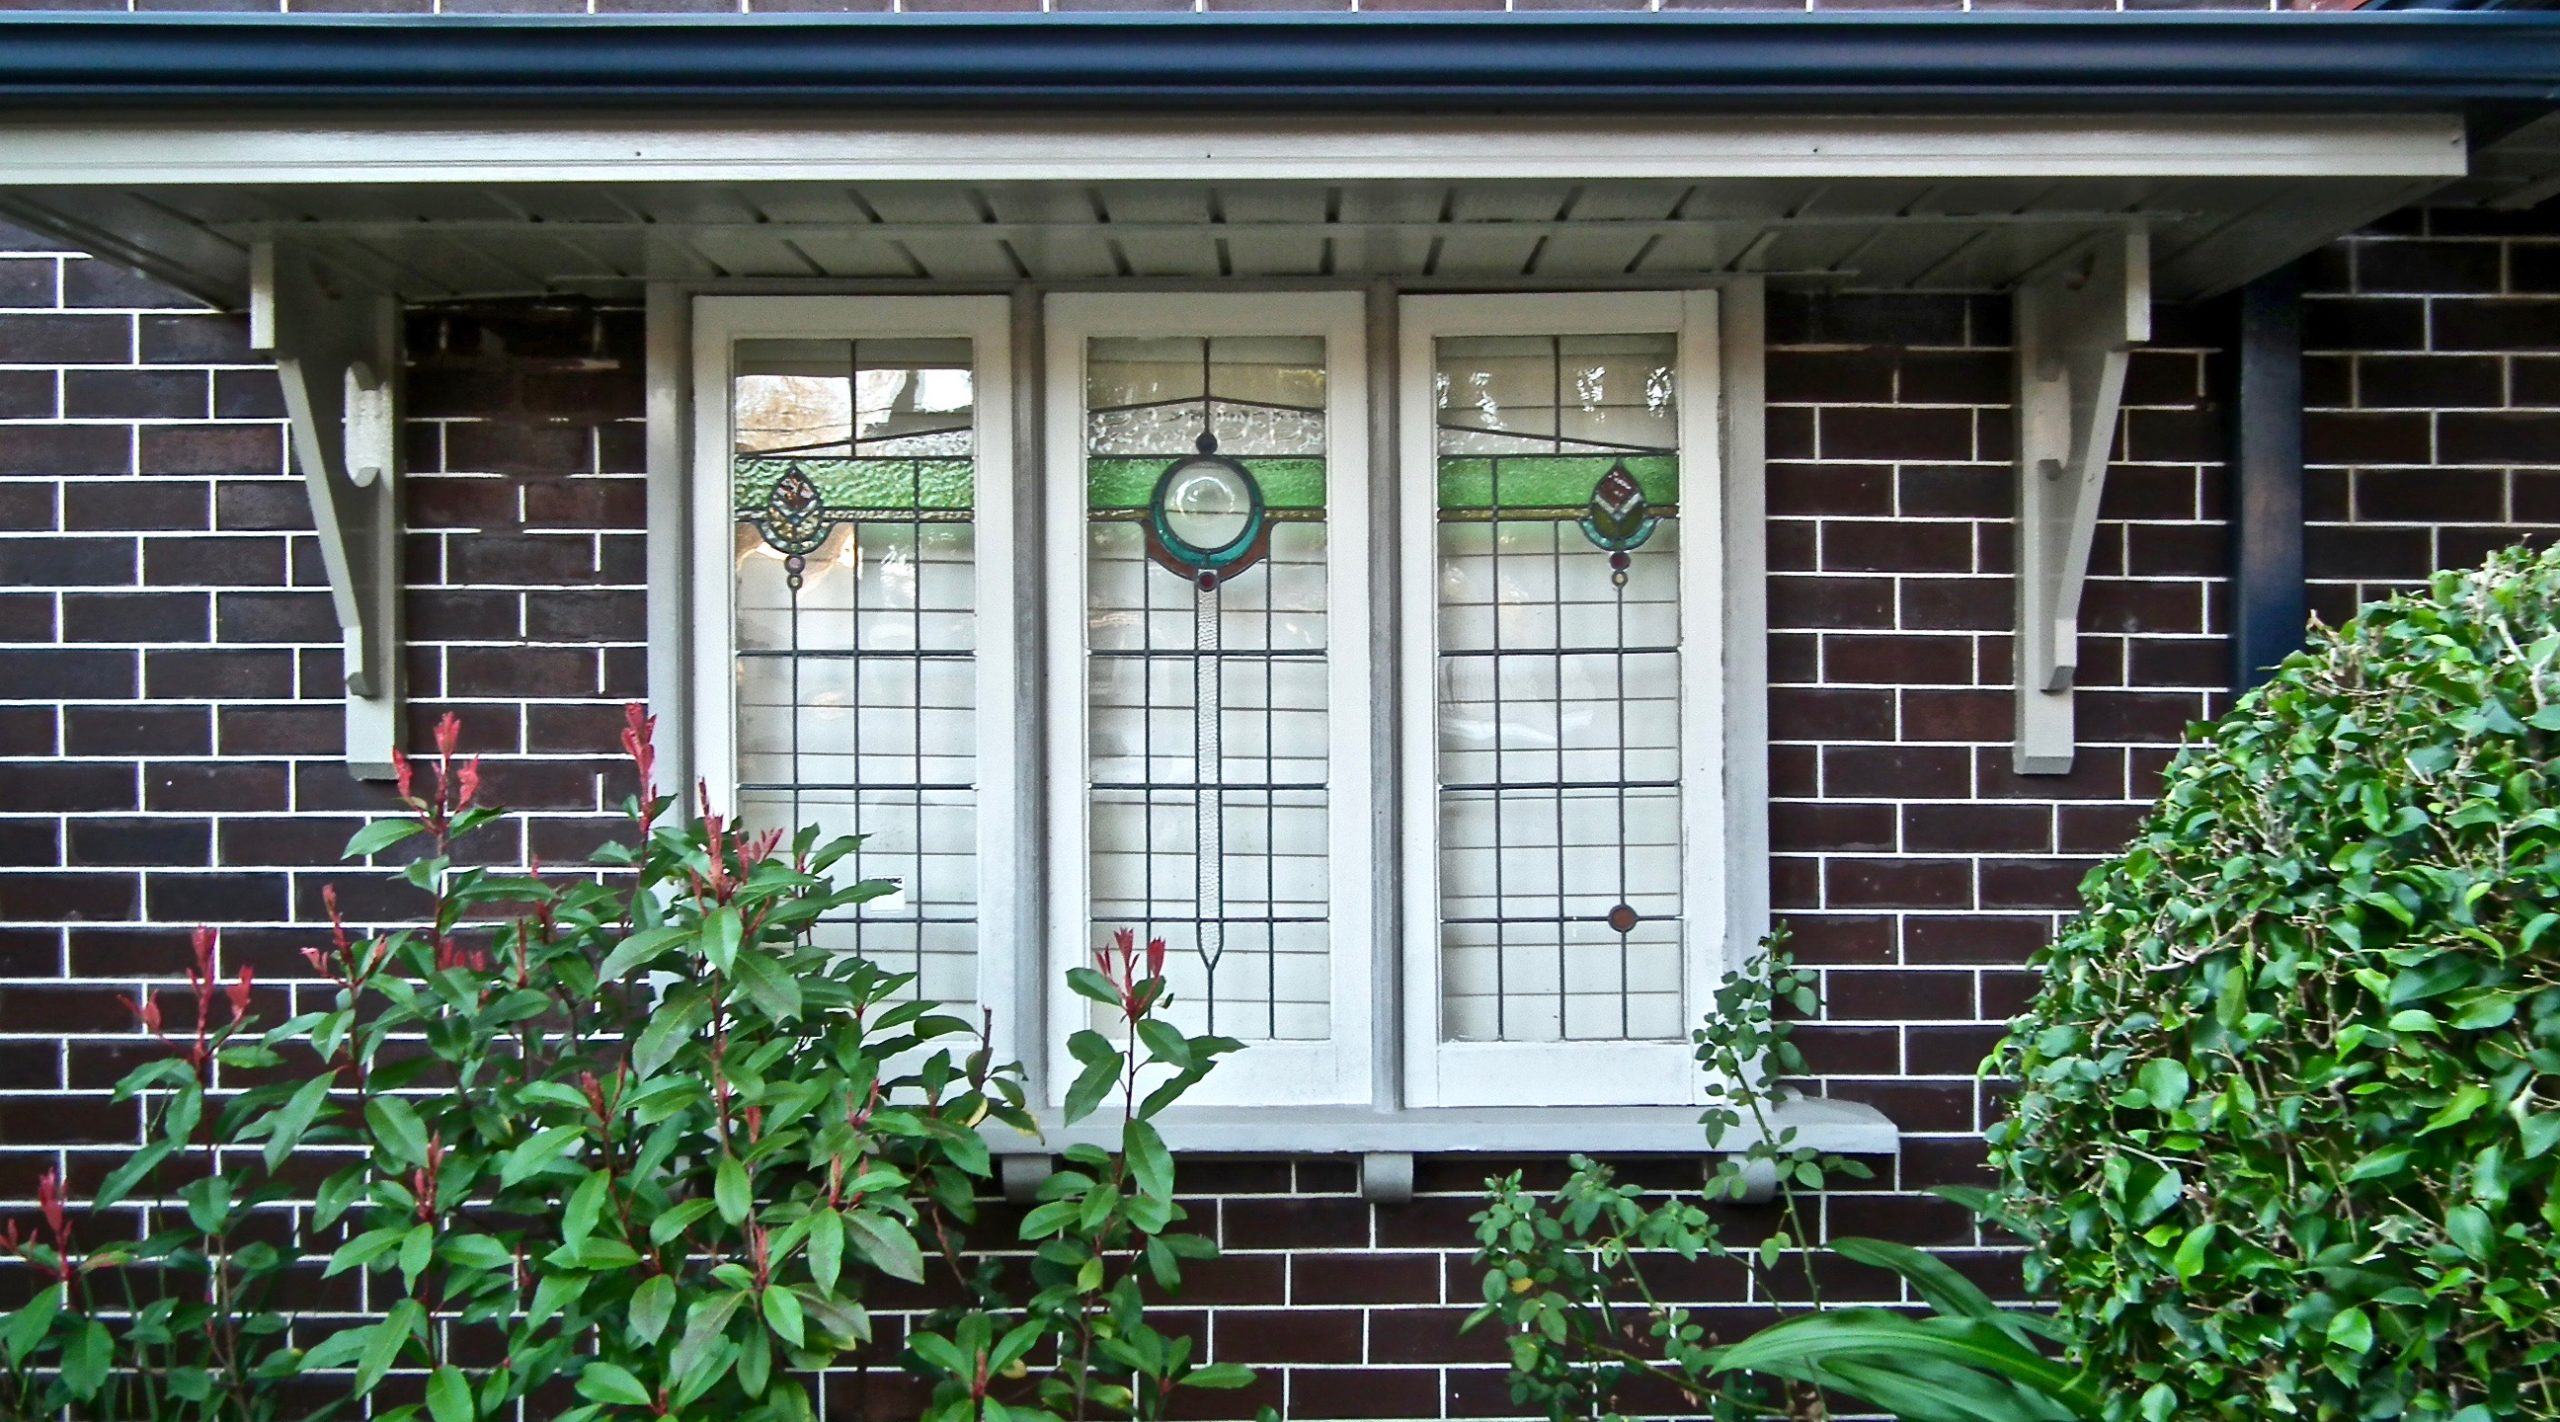 Outside of home shows dark brick with three-pane window and awning. Window has green stained glass decoration in a horizontal strip across all three windows, towards the top. Green shrubs in front of the house, covering part of the lower windows.